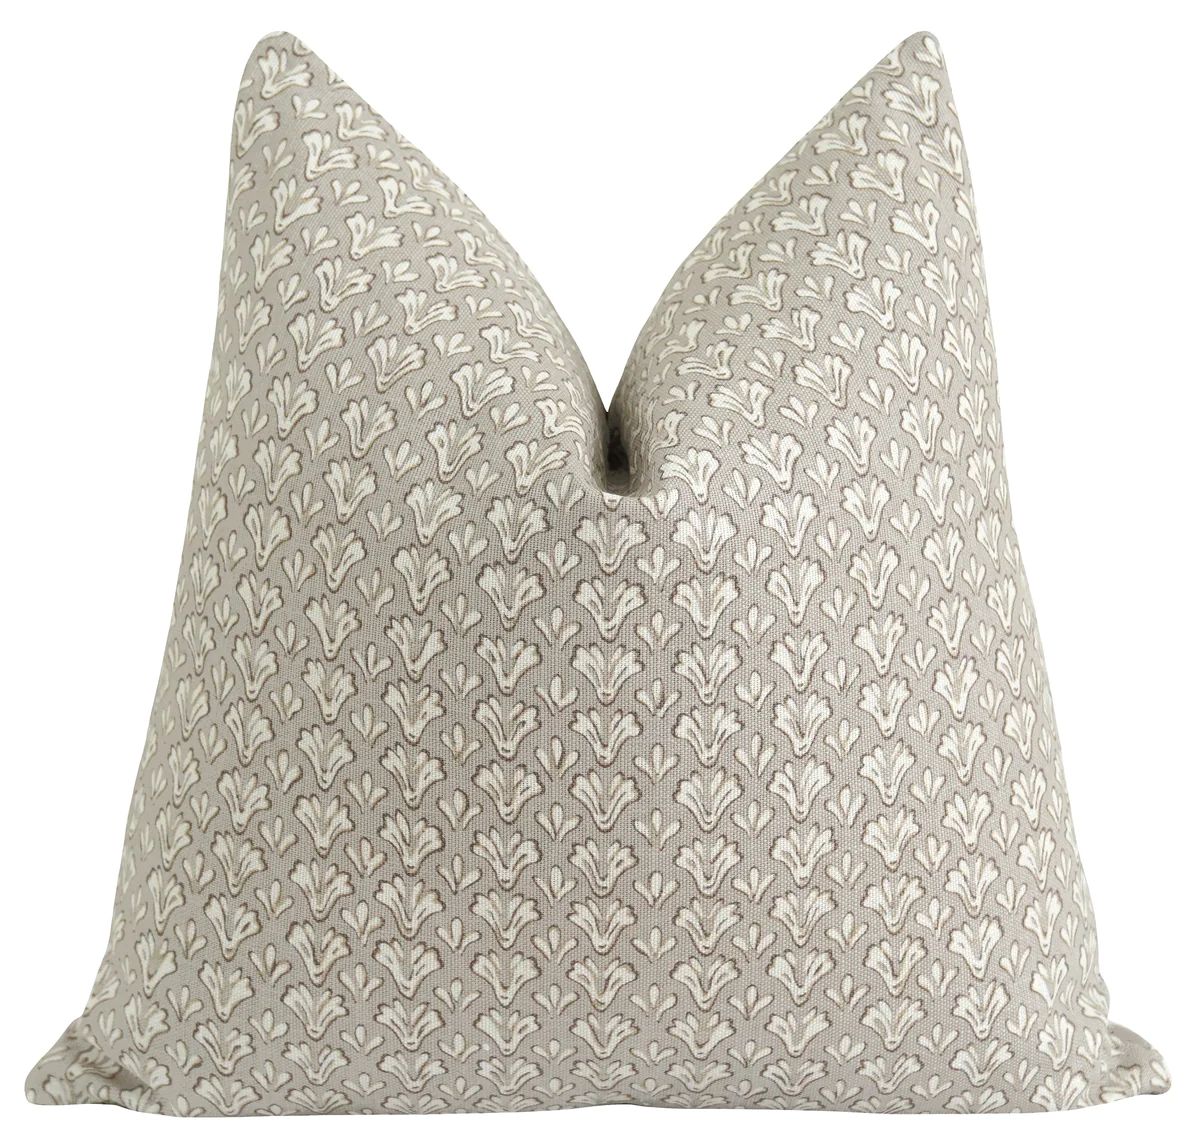 Selkirk Greige Small Floral Pillow | Land of Pillows